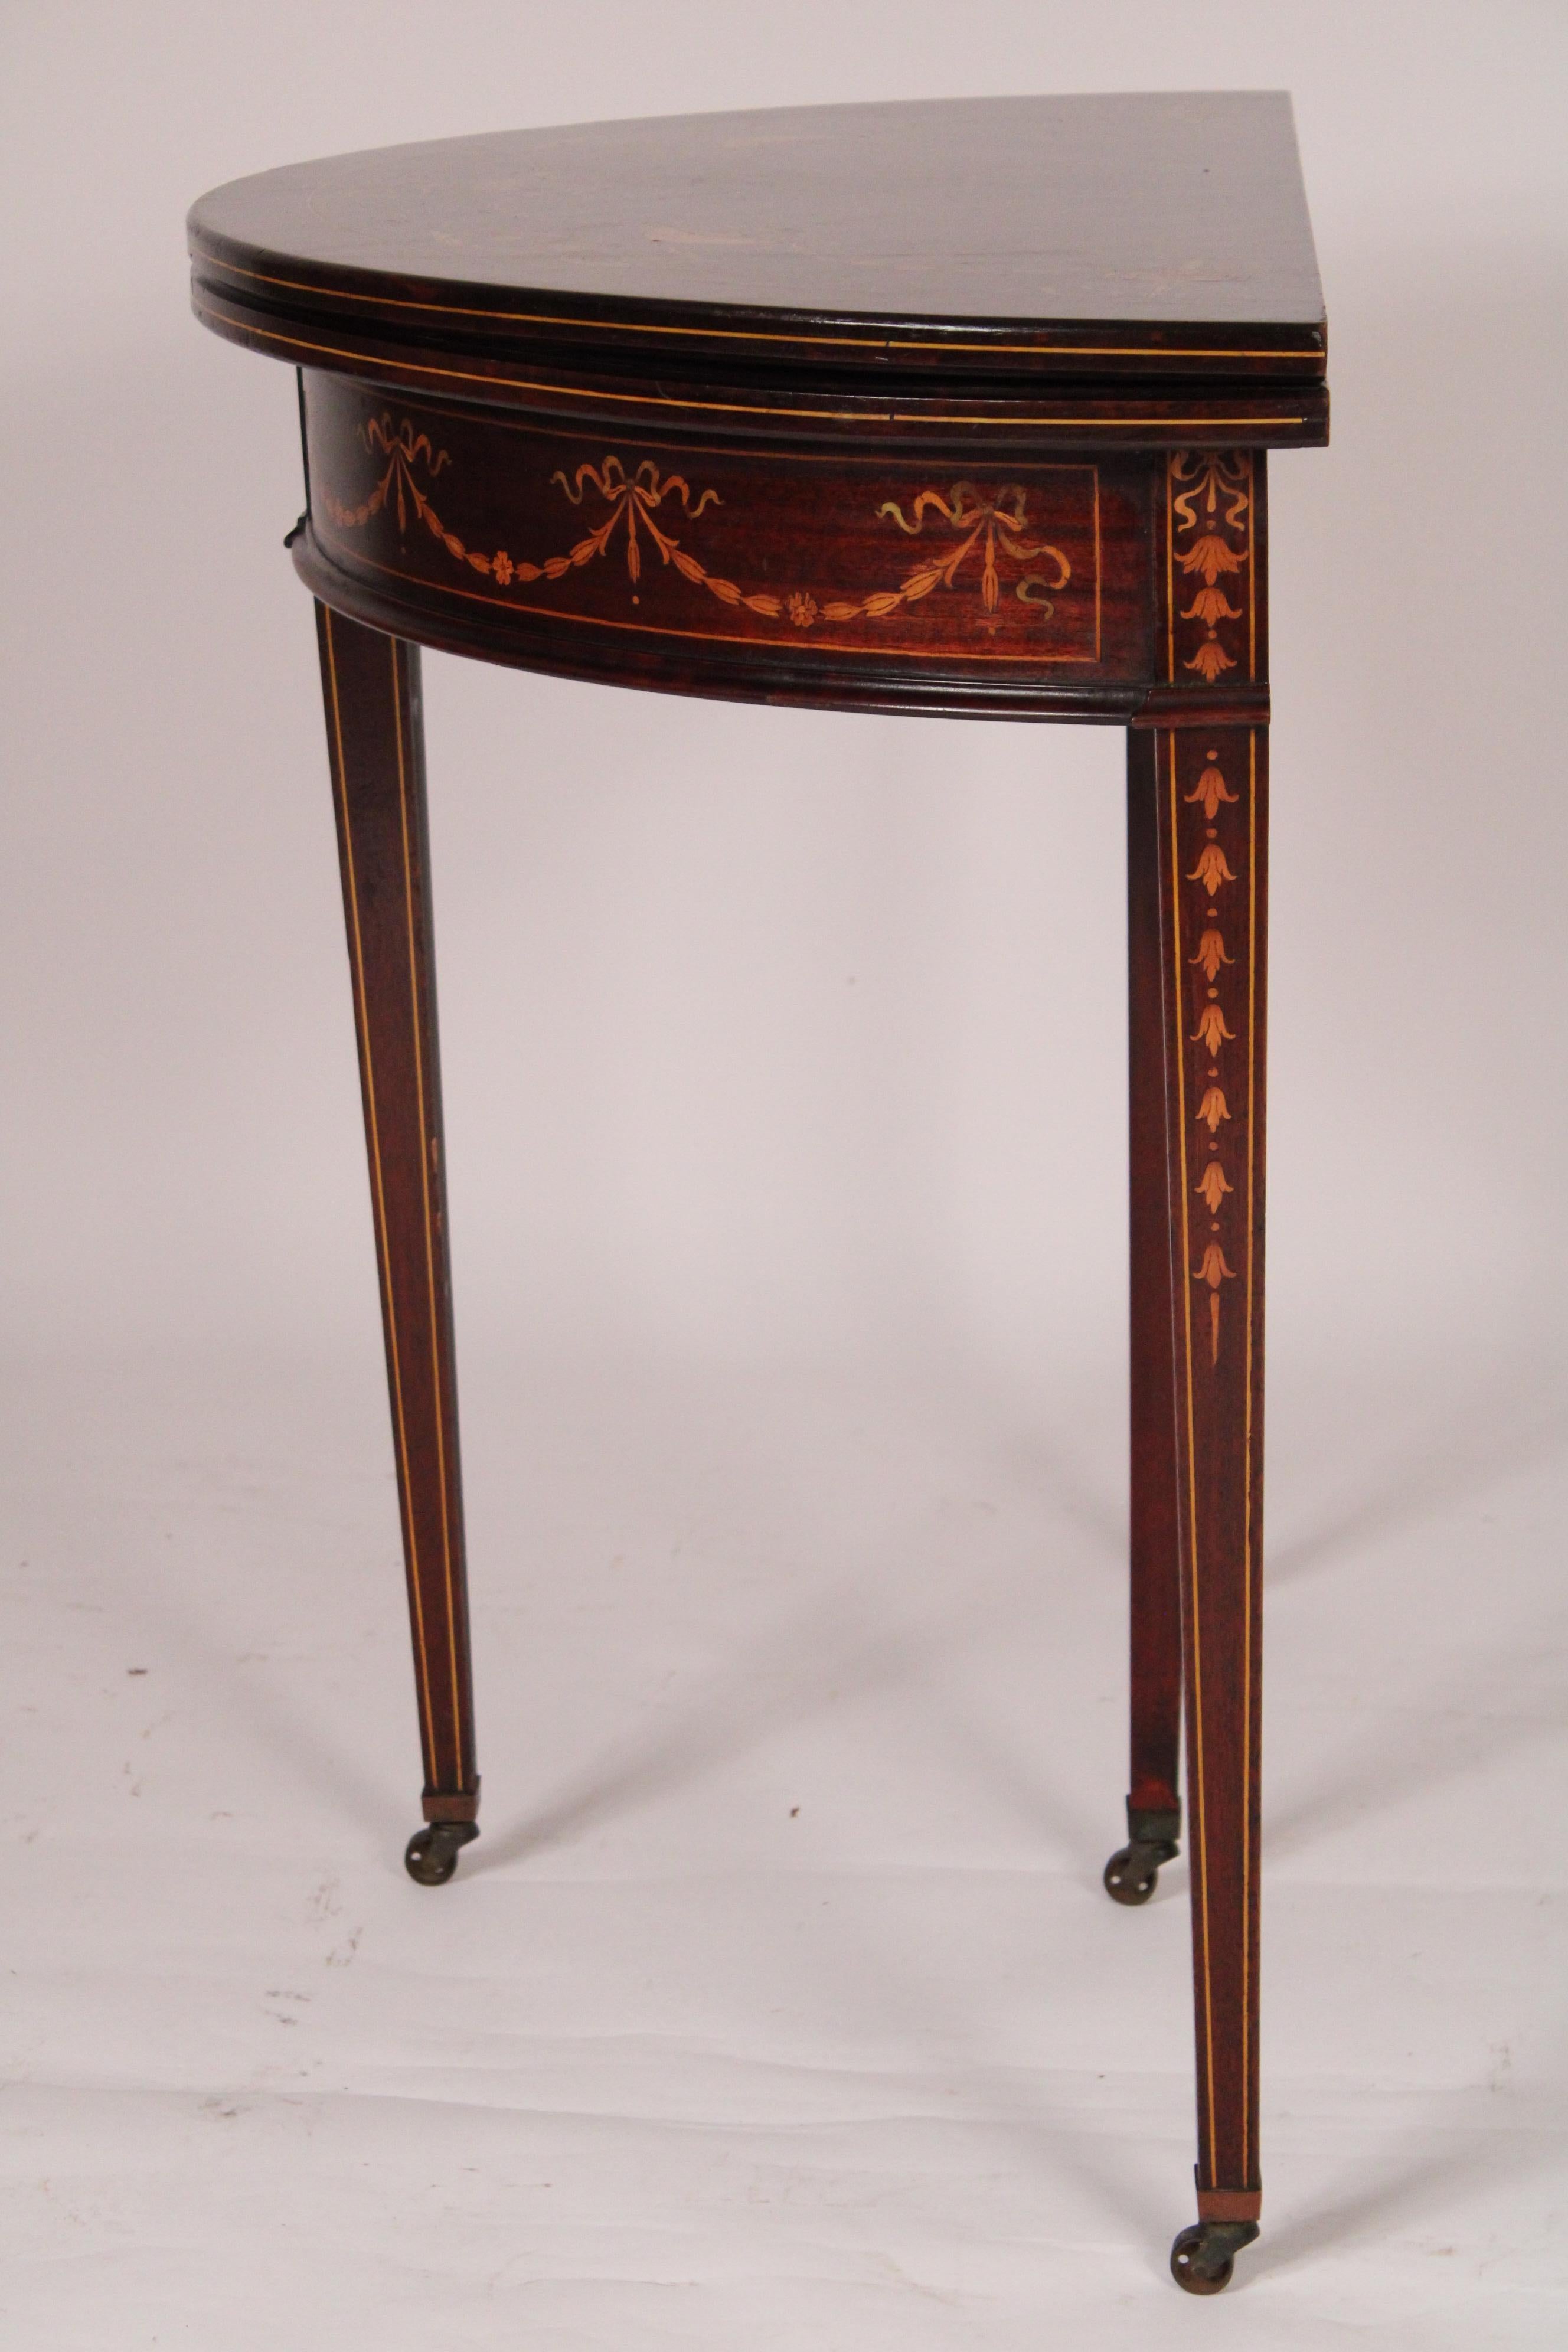 Early 20th Century English Edwardian Mahogany Inlaid Console / Games Table For Sale